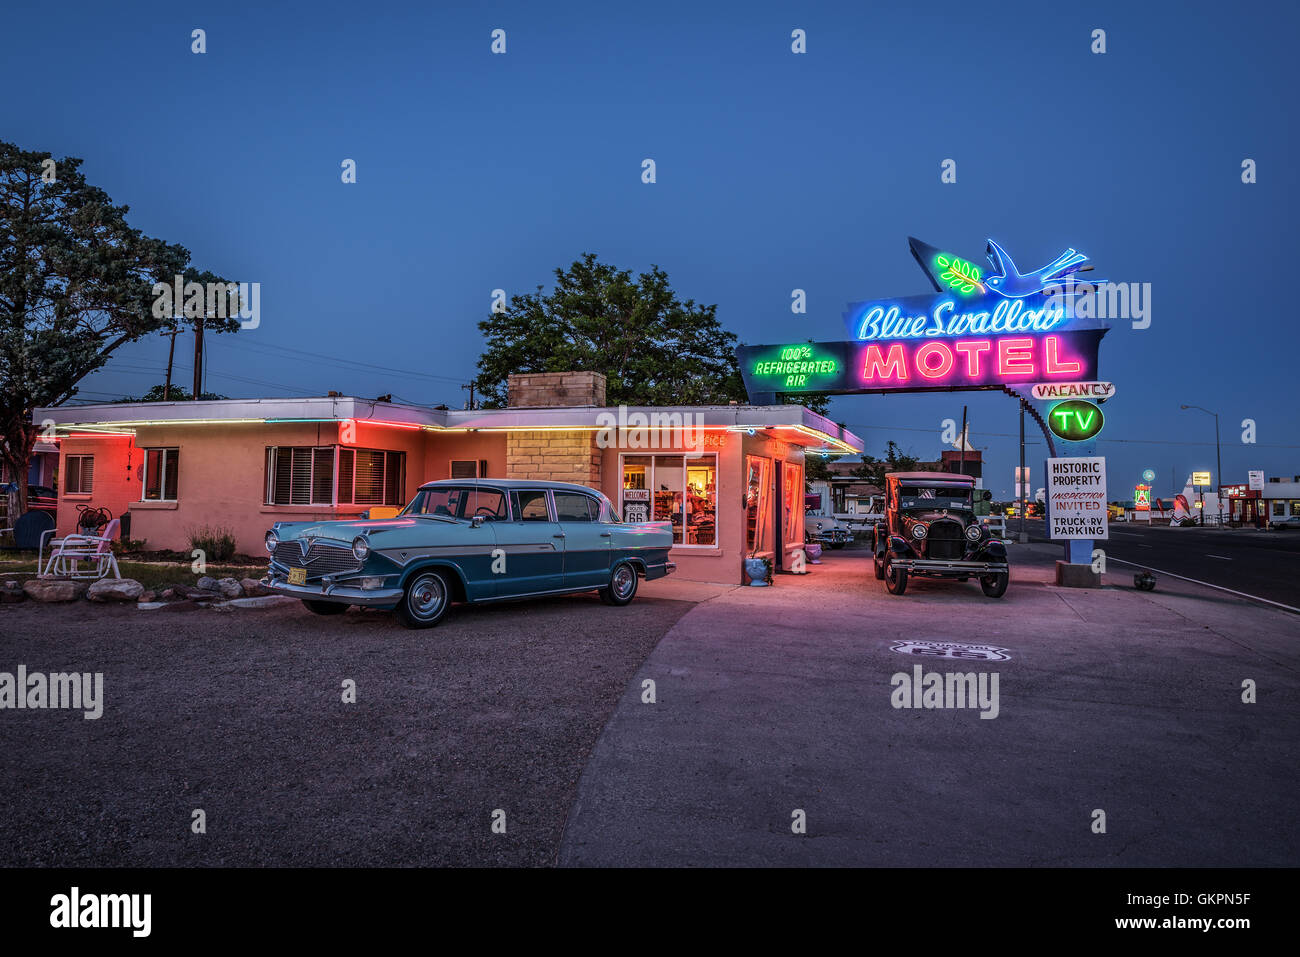 Historic Blue Swallow Motel with vintage cars parked in front of it. Stock Photo